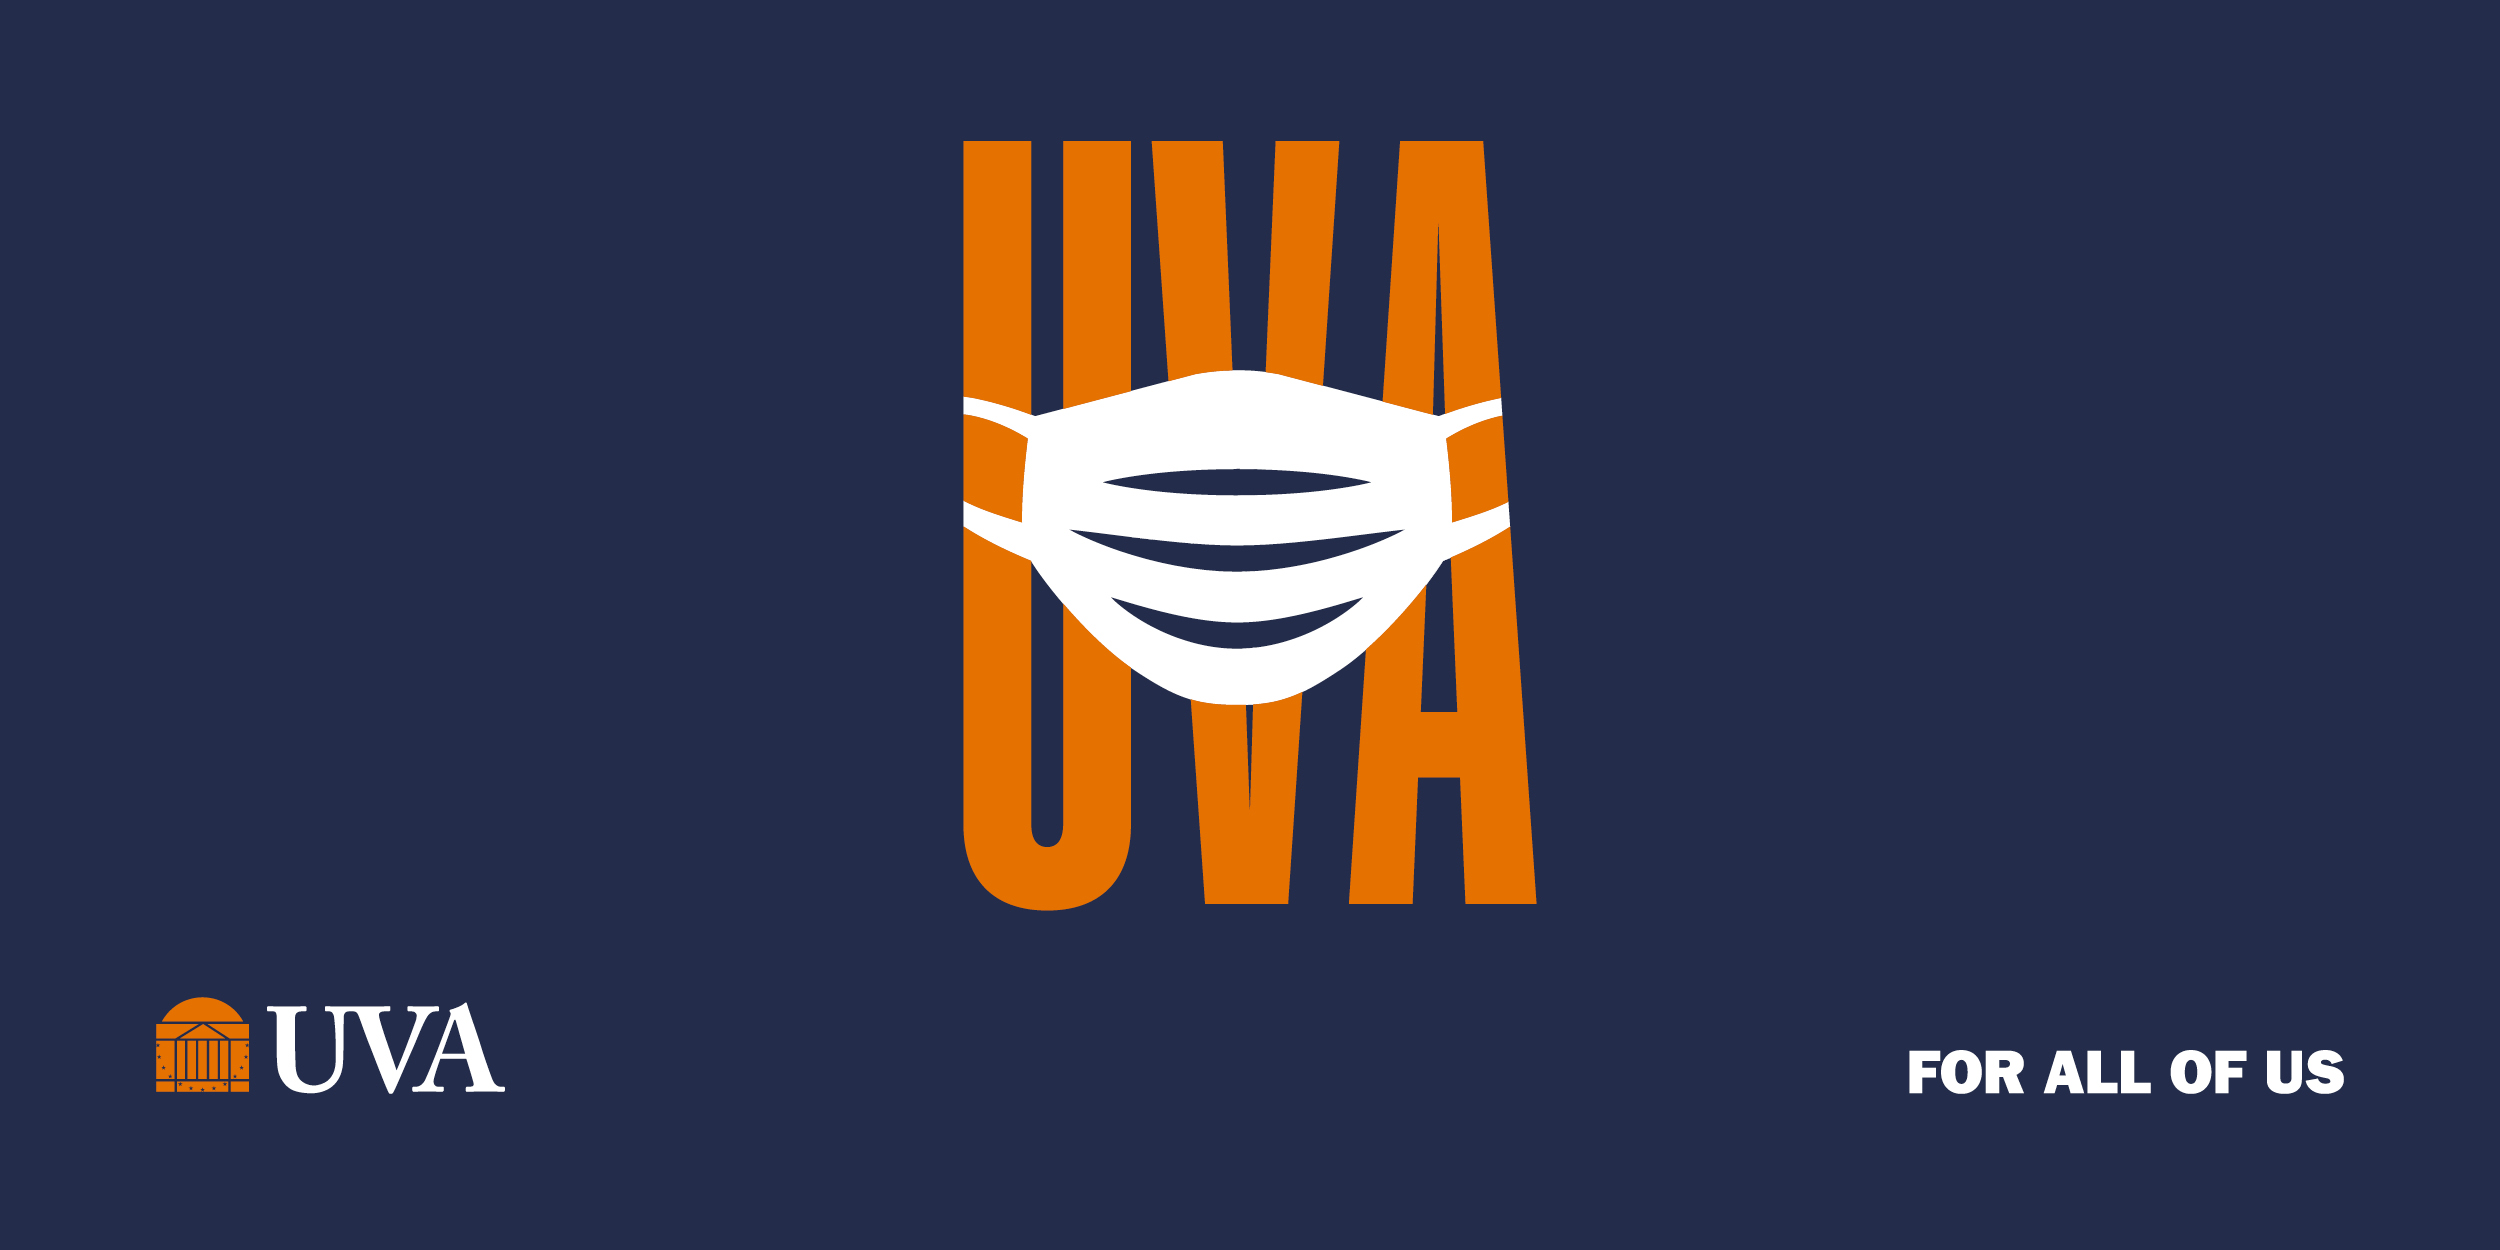 Wear a mask, for all of us. UVA.